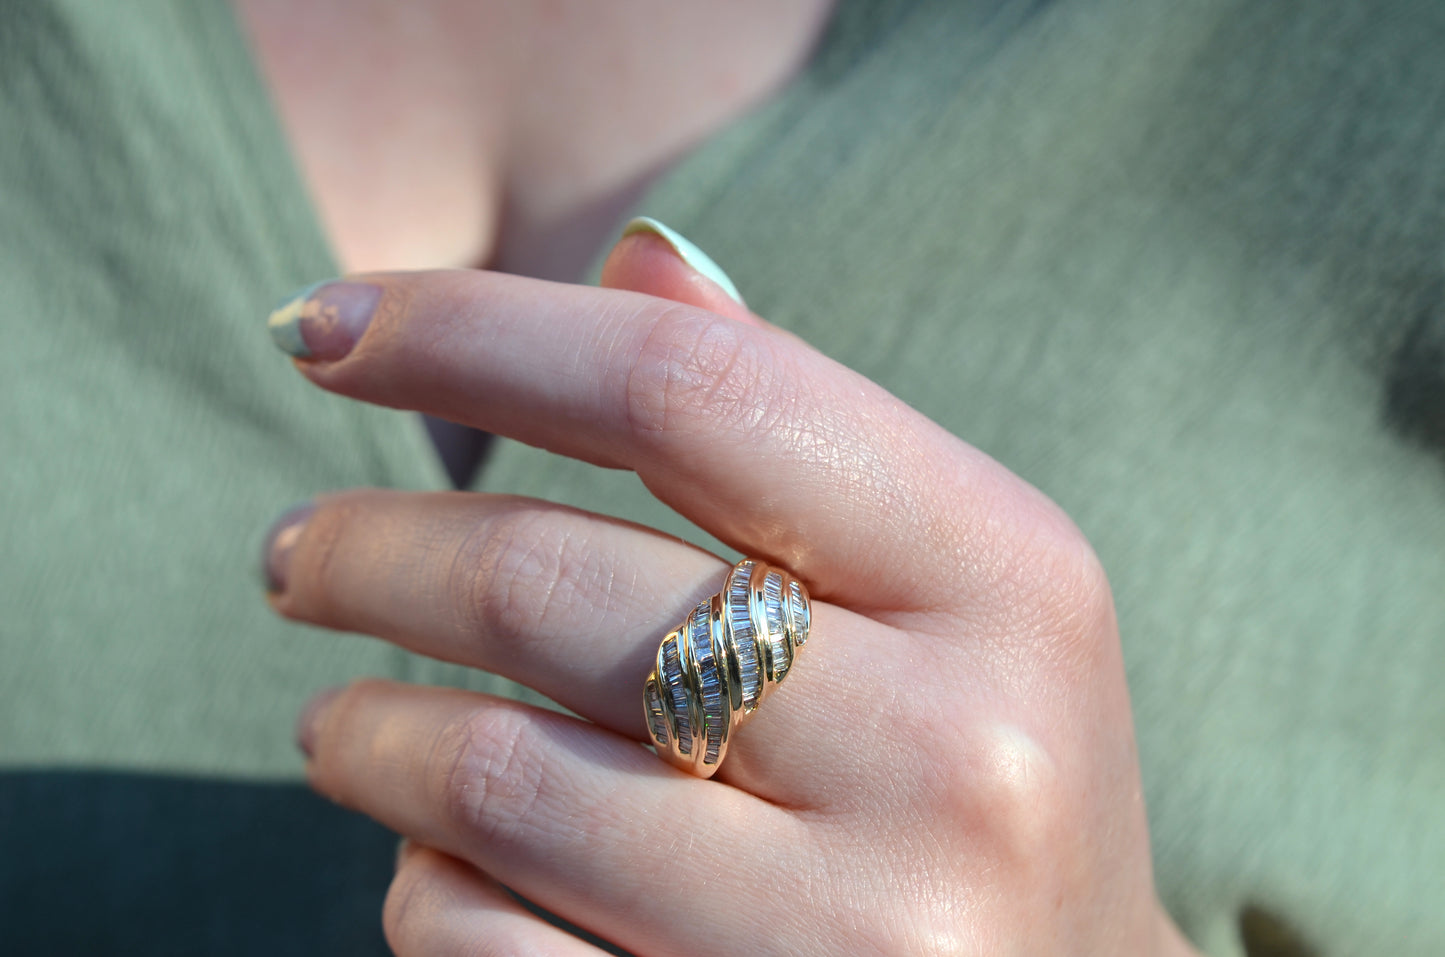 Dramatic Vintage Baguette Dome Ring